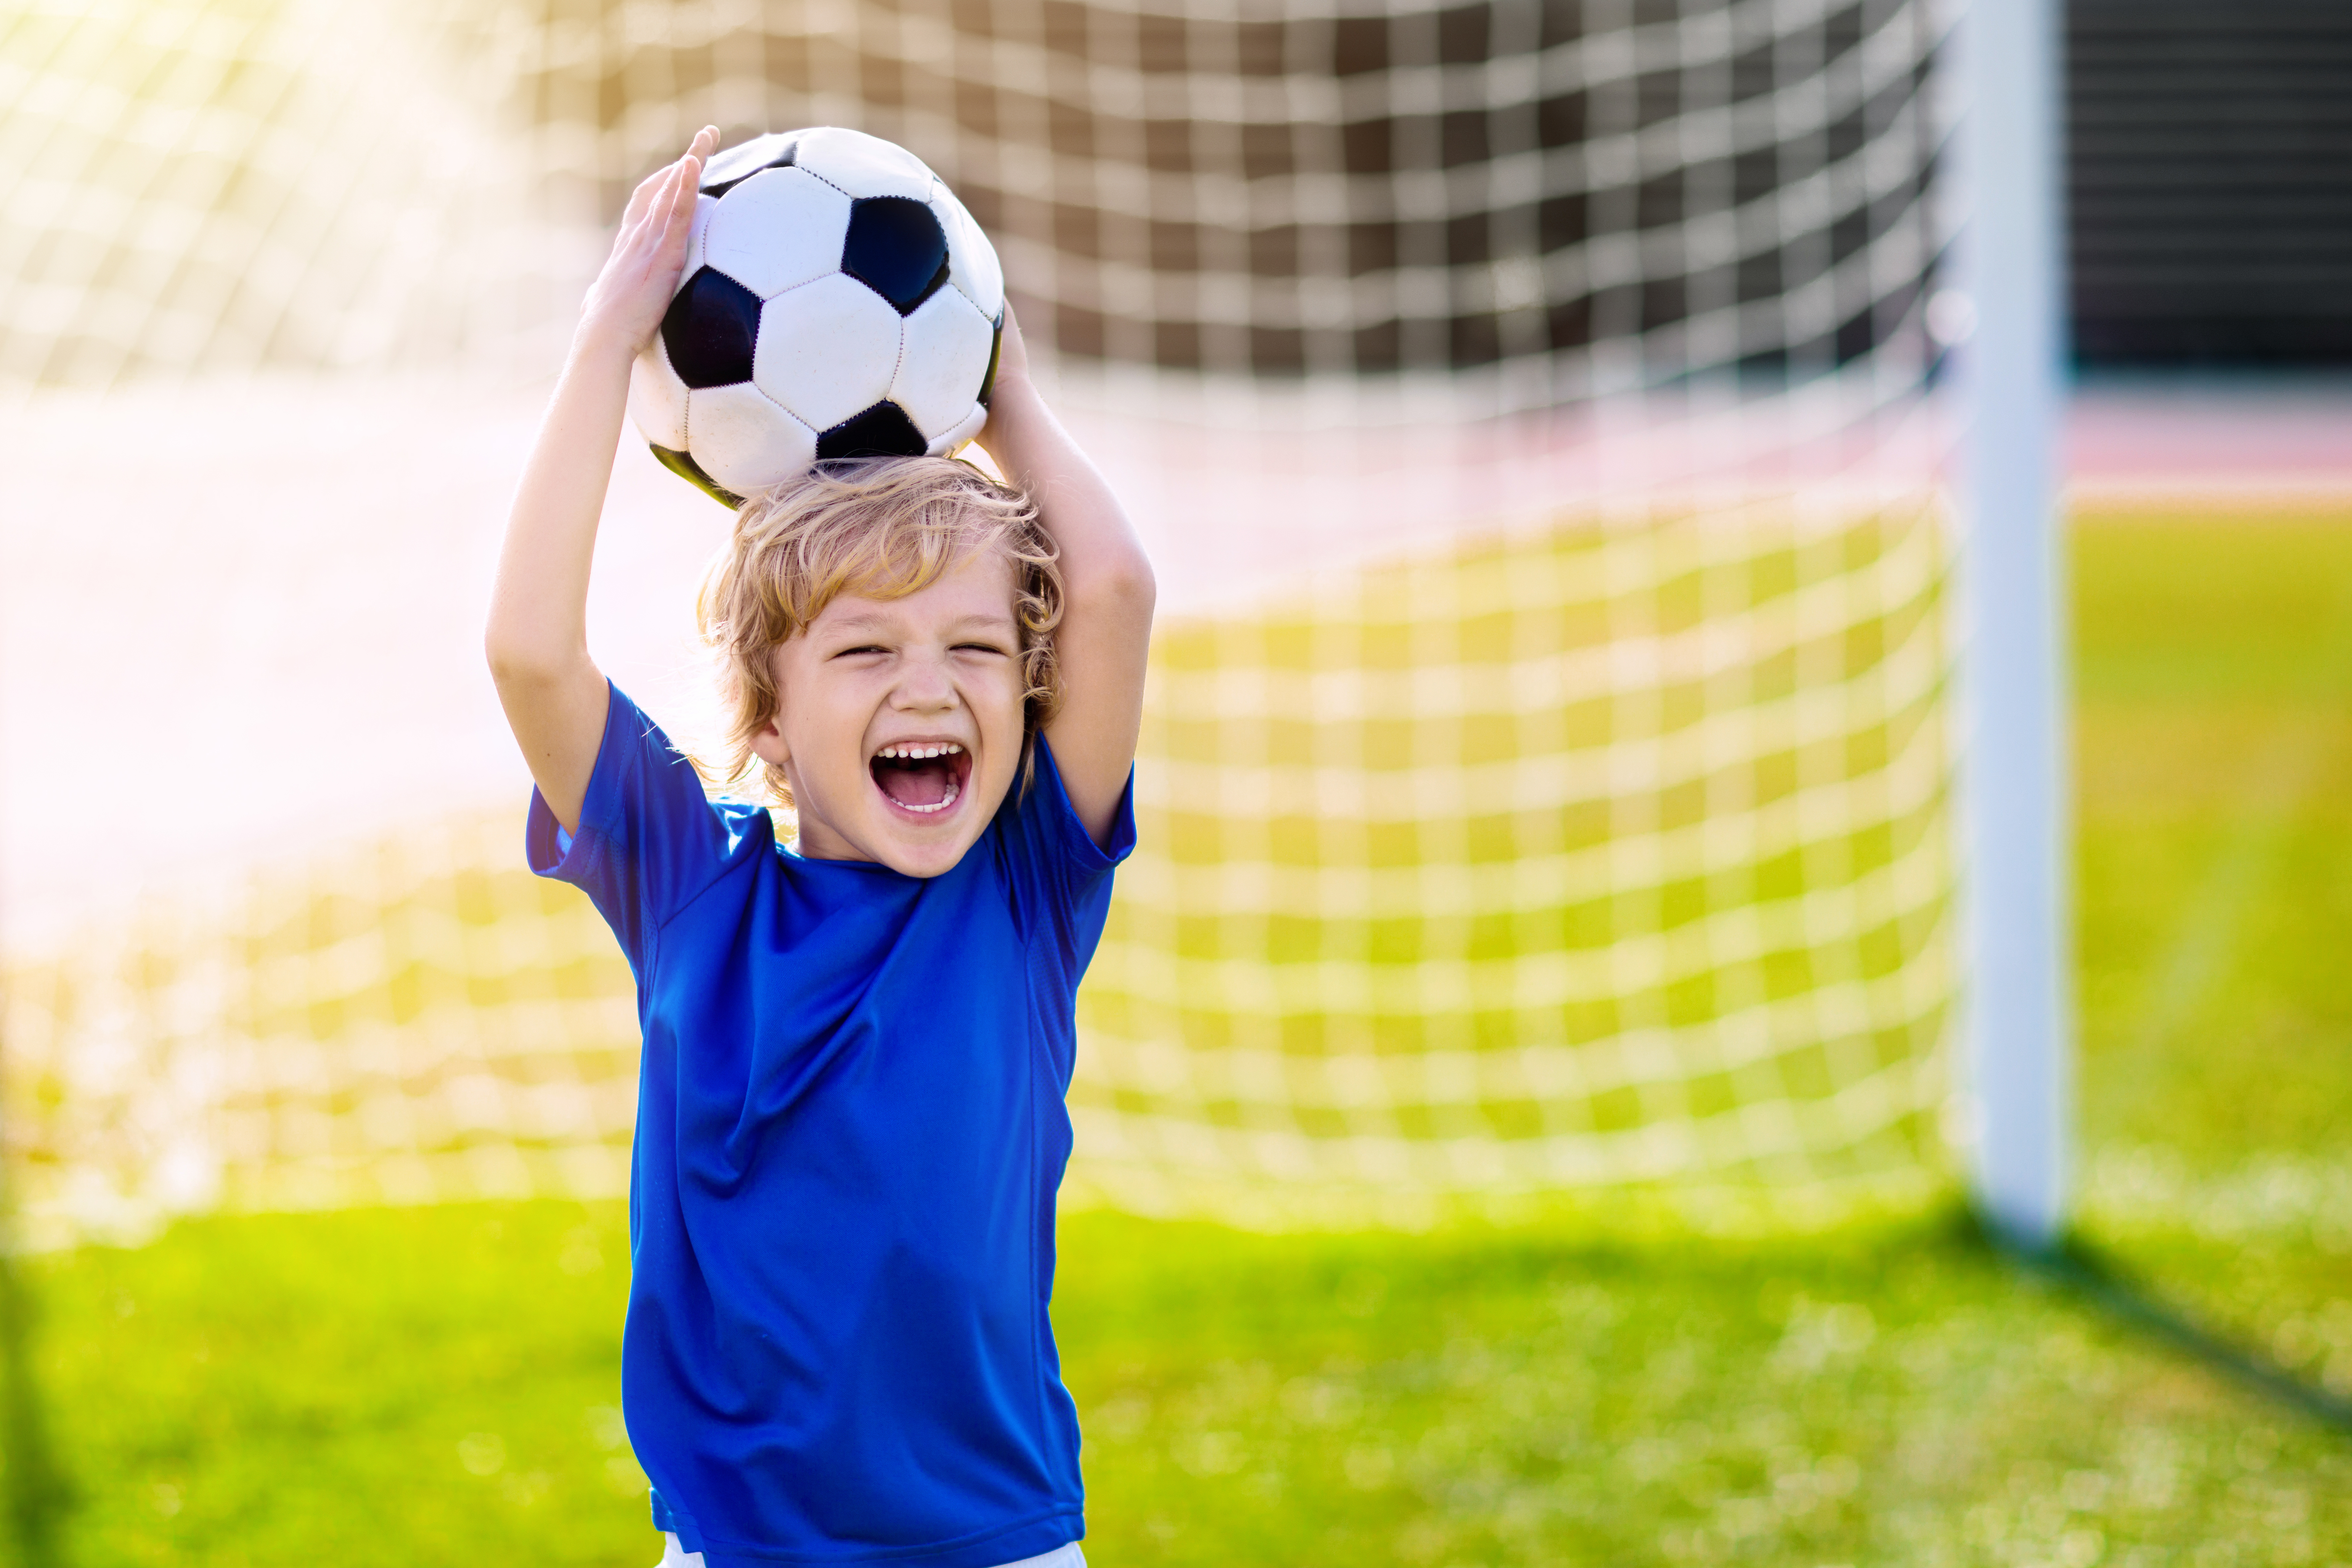 young boy holding a soccer ball over his head smiling with a soccer net behind him on a grass field